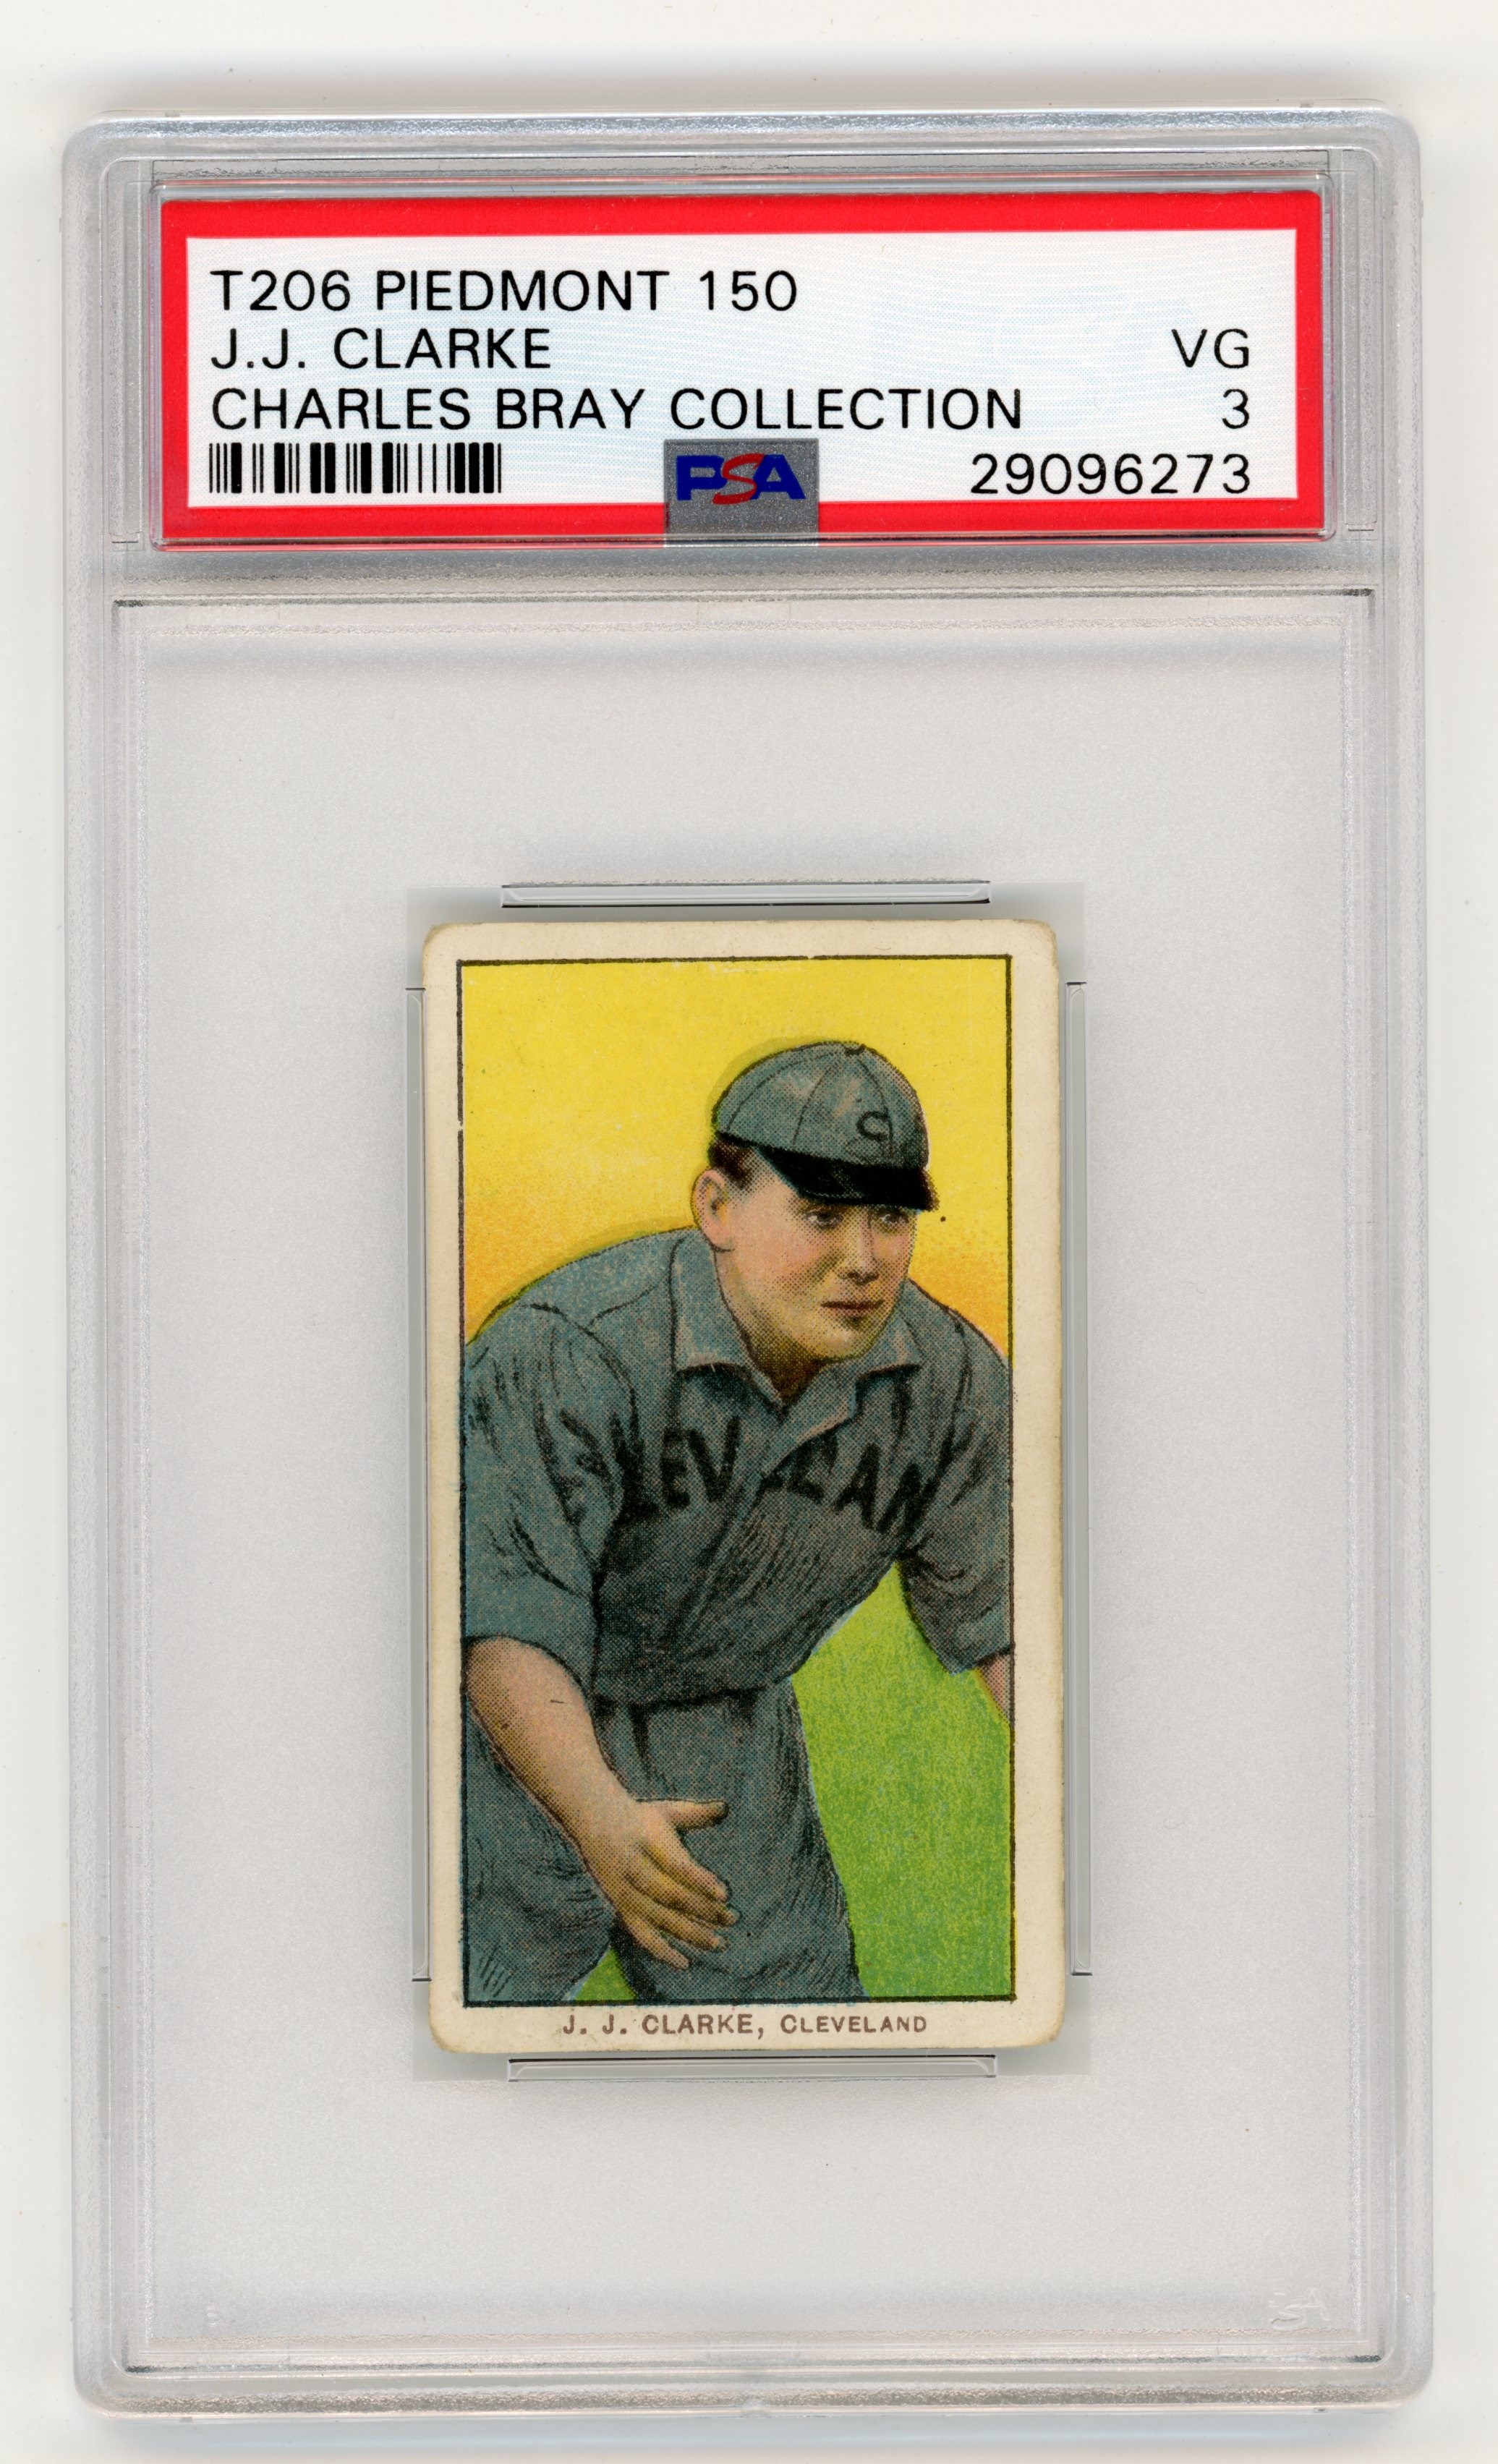 T206 Piedmont 150 J.J. Clarke PSA 3 From Charles Bray Collection